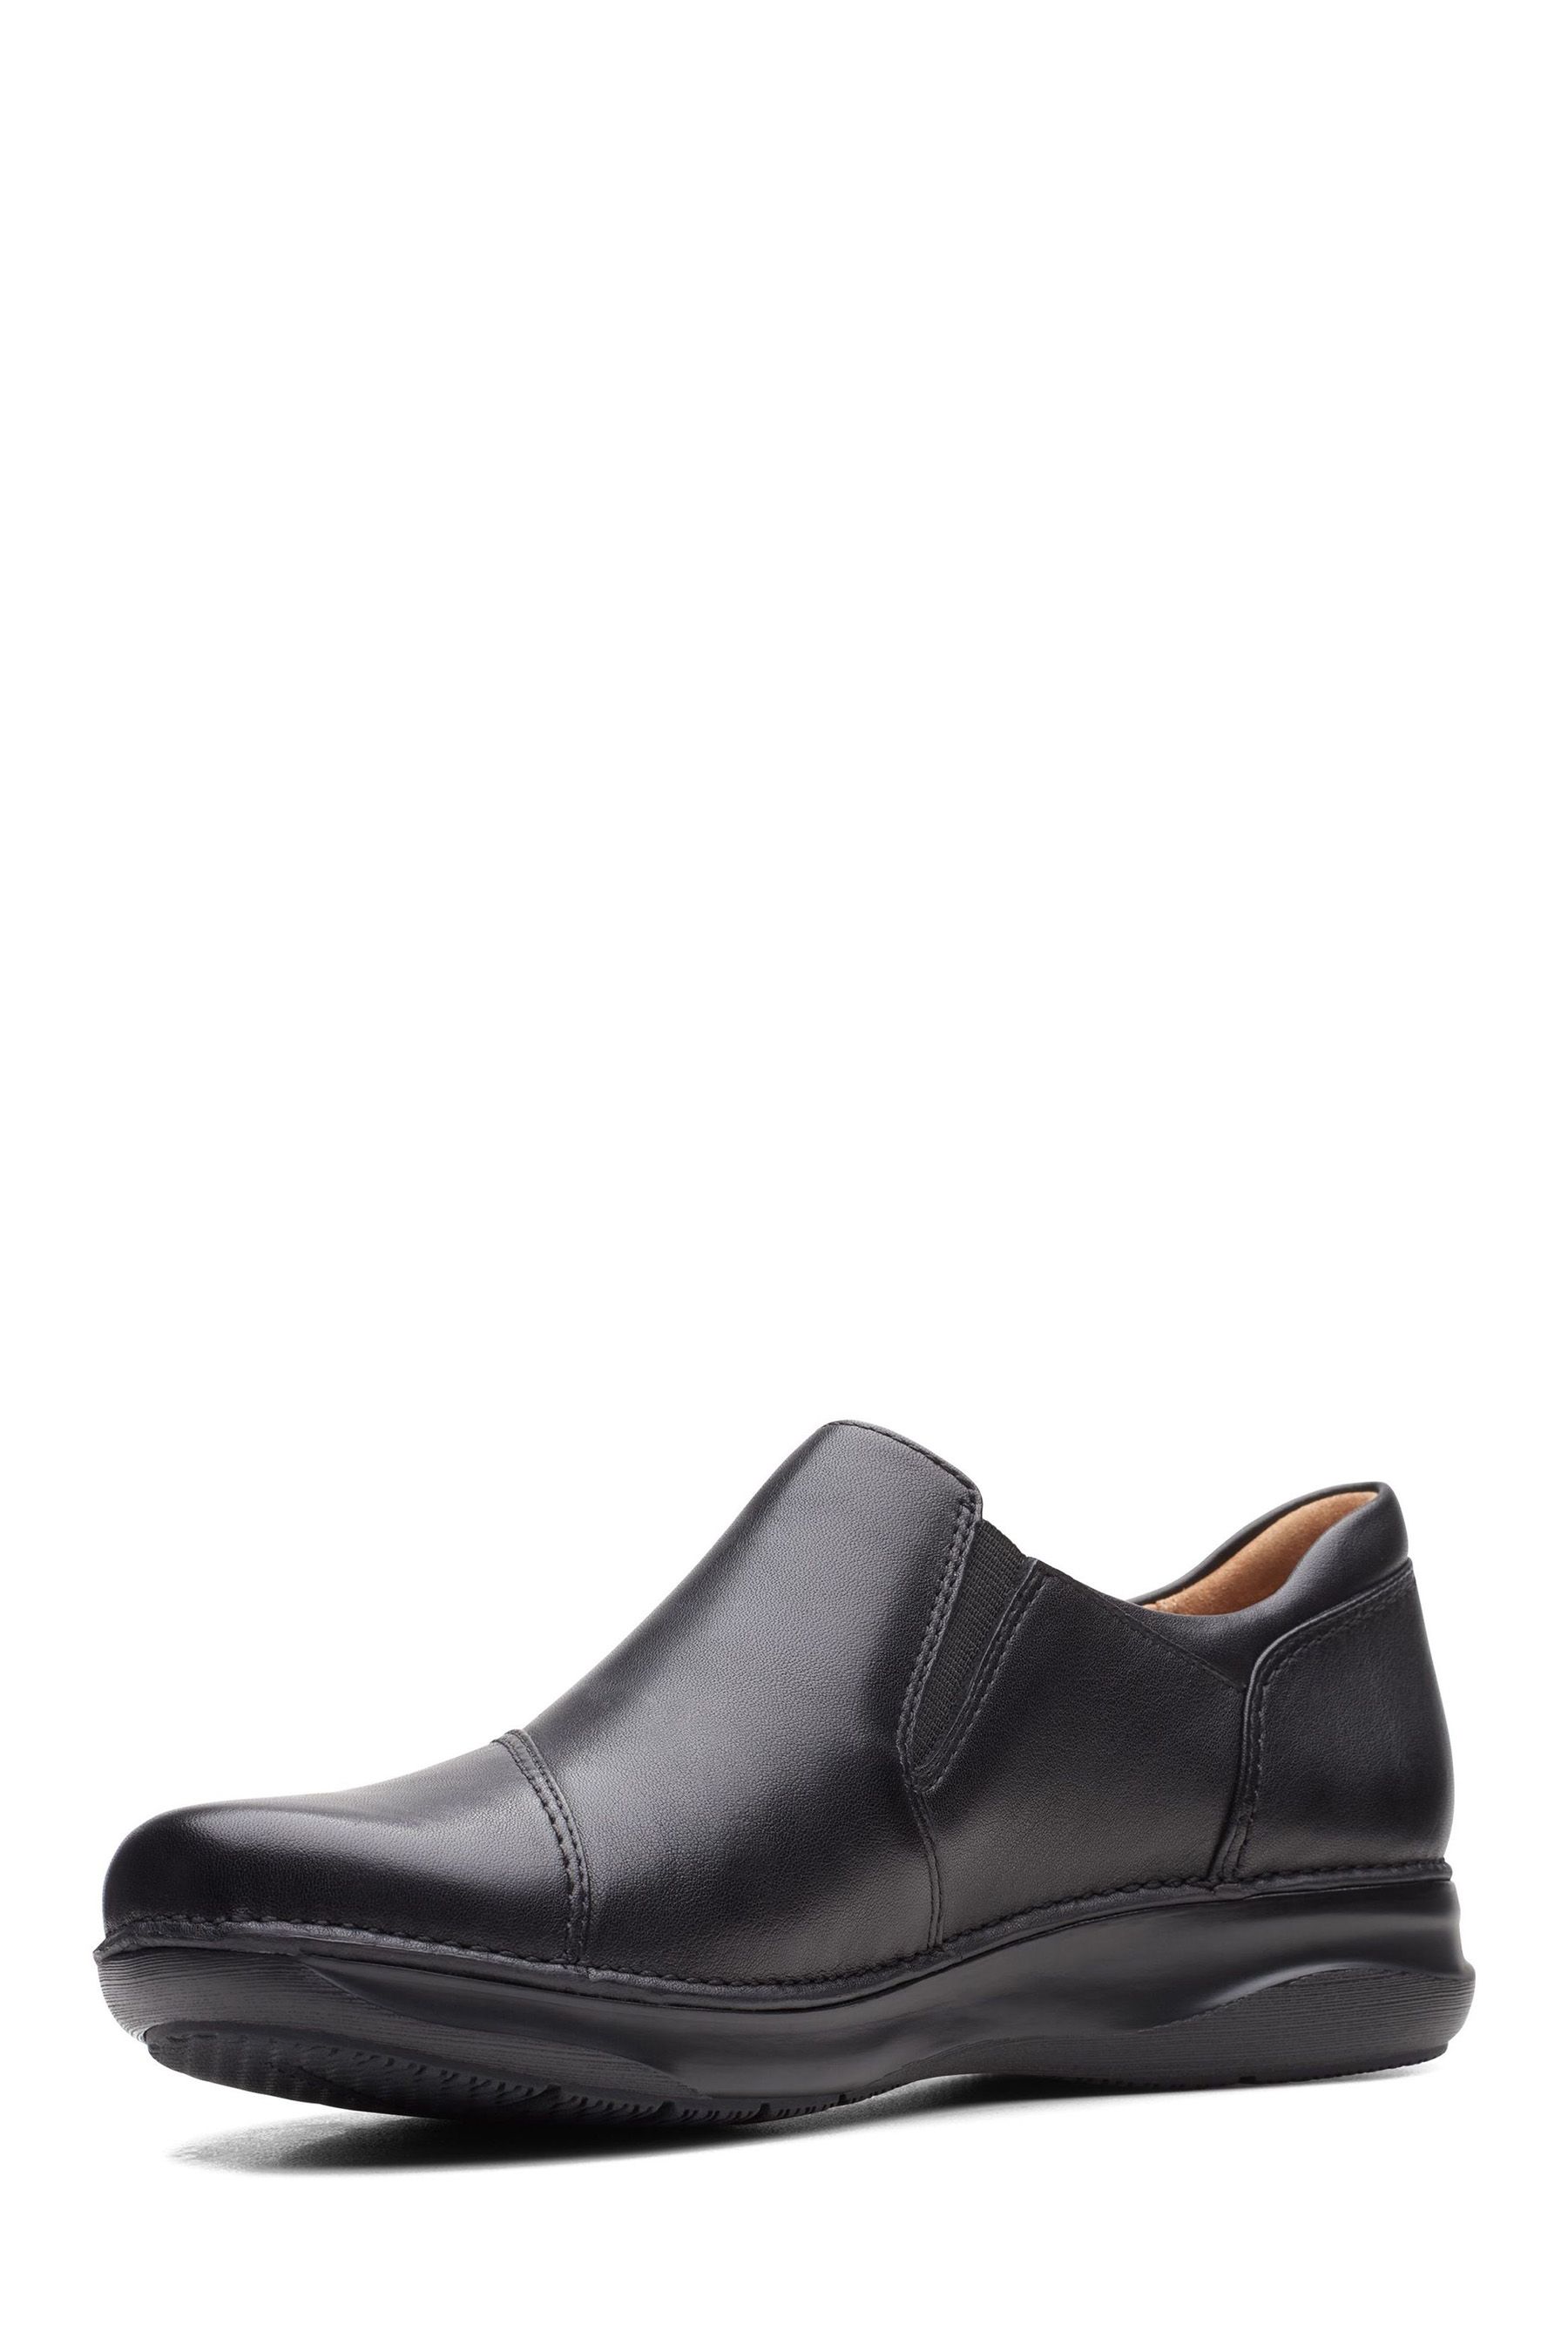 Buy Clarks Leather Appley Zip Shoes from Next Ireland